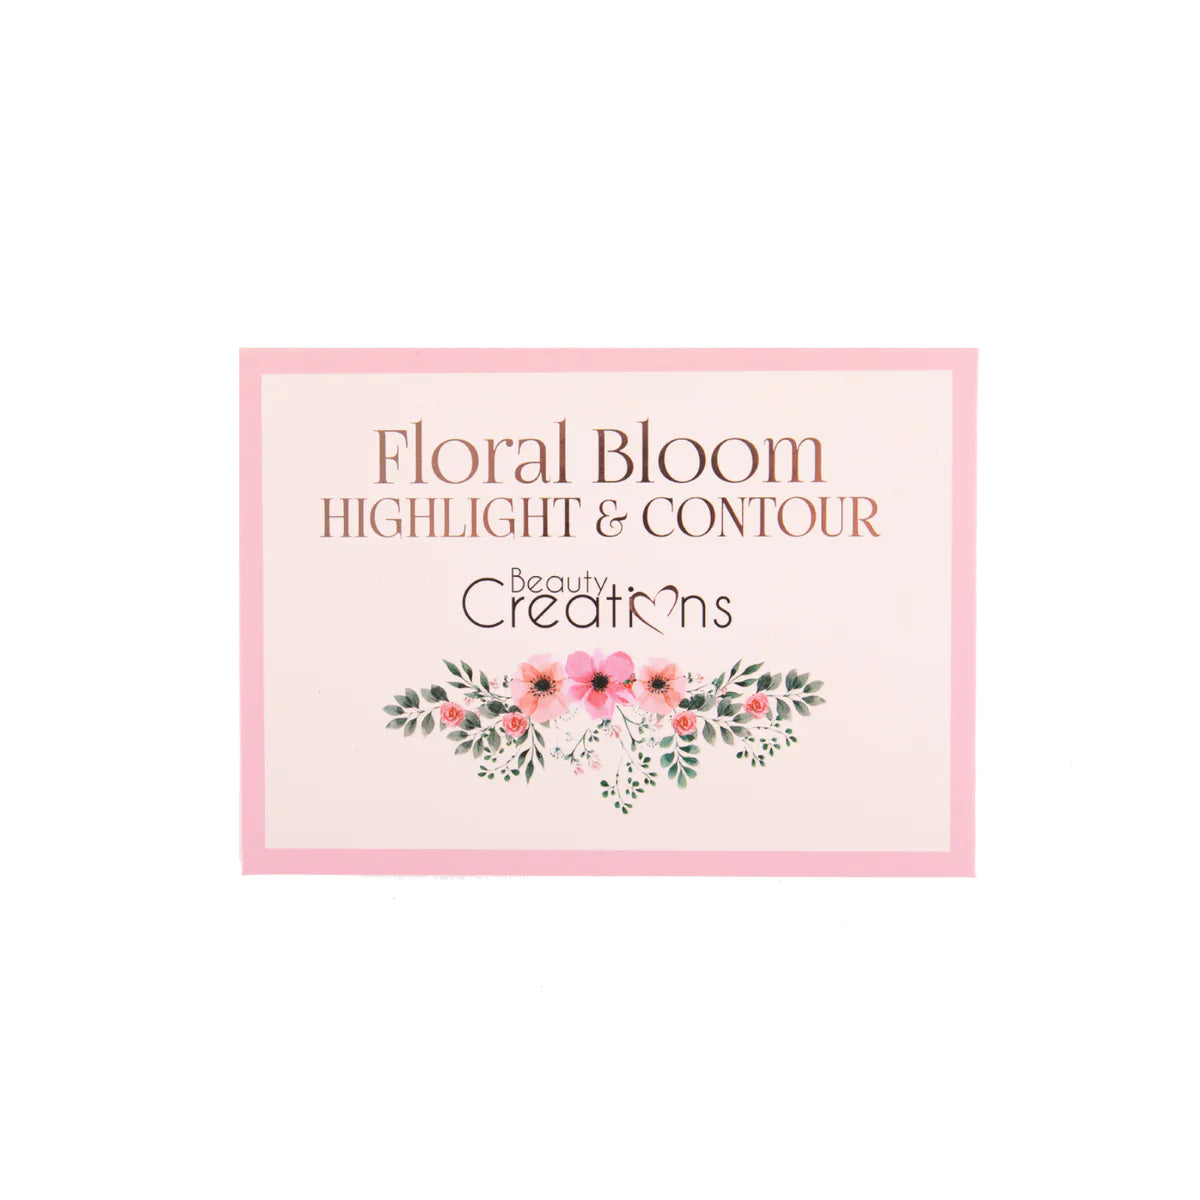 BEAUTY CREATIONS FLORAL Bloom Highlight and Contour ￼￼بالت اضاءة وكونتور